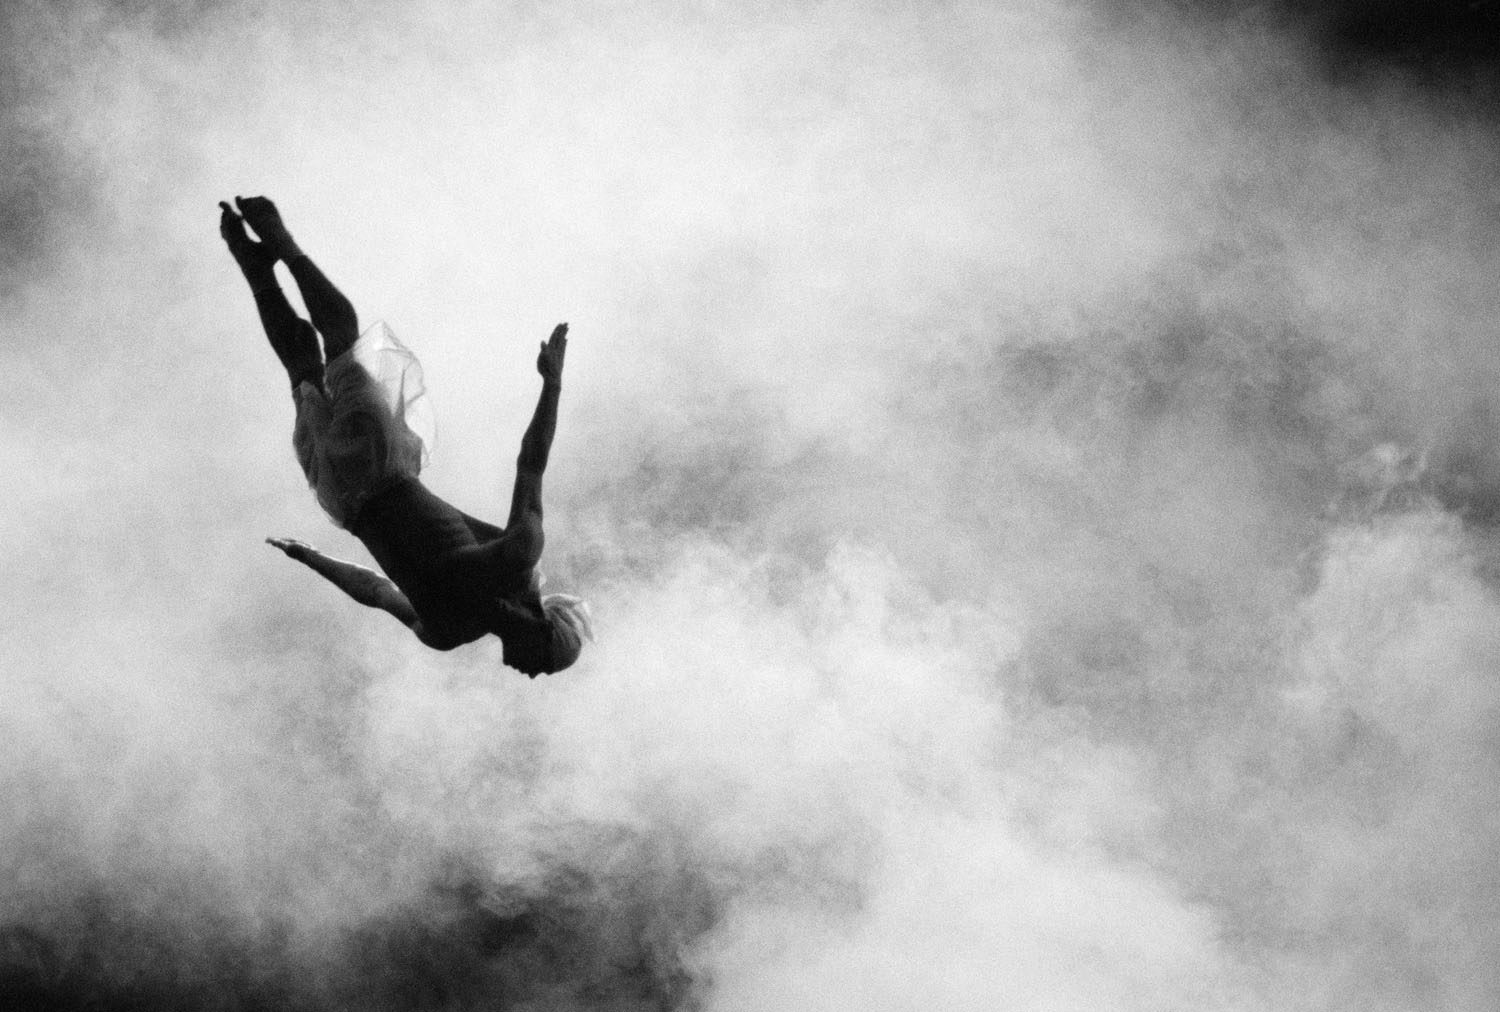 An acrobat at the Old Circus, Moscow, November 1997.  Photo by James Hill.